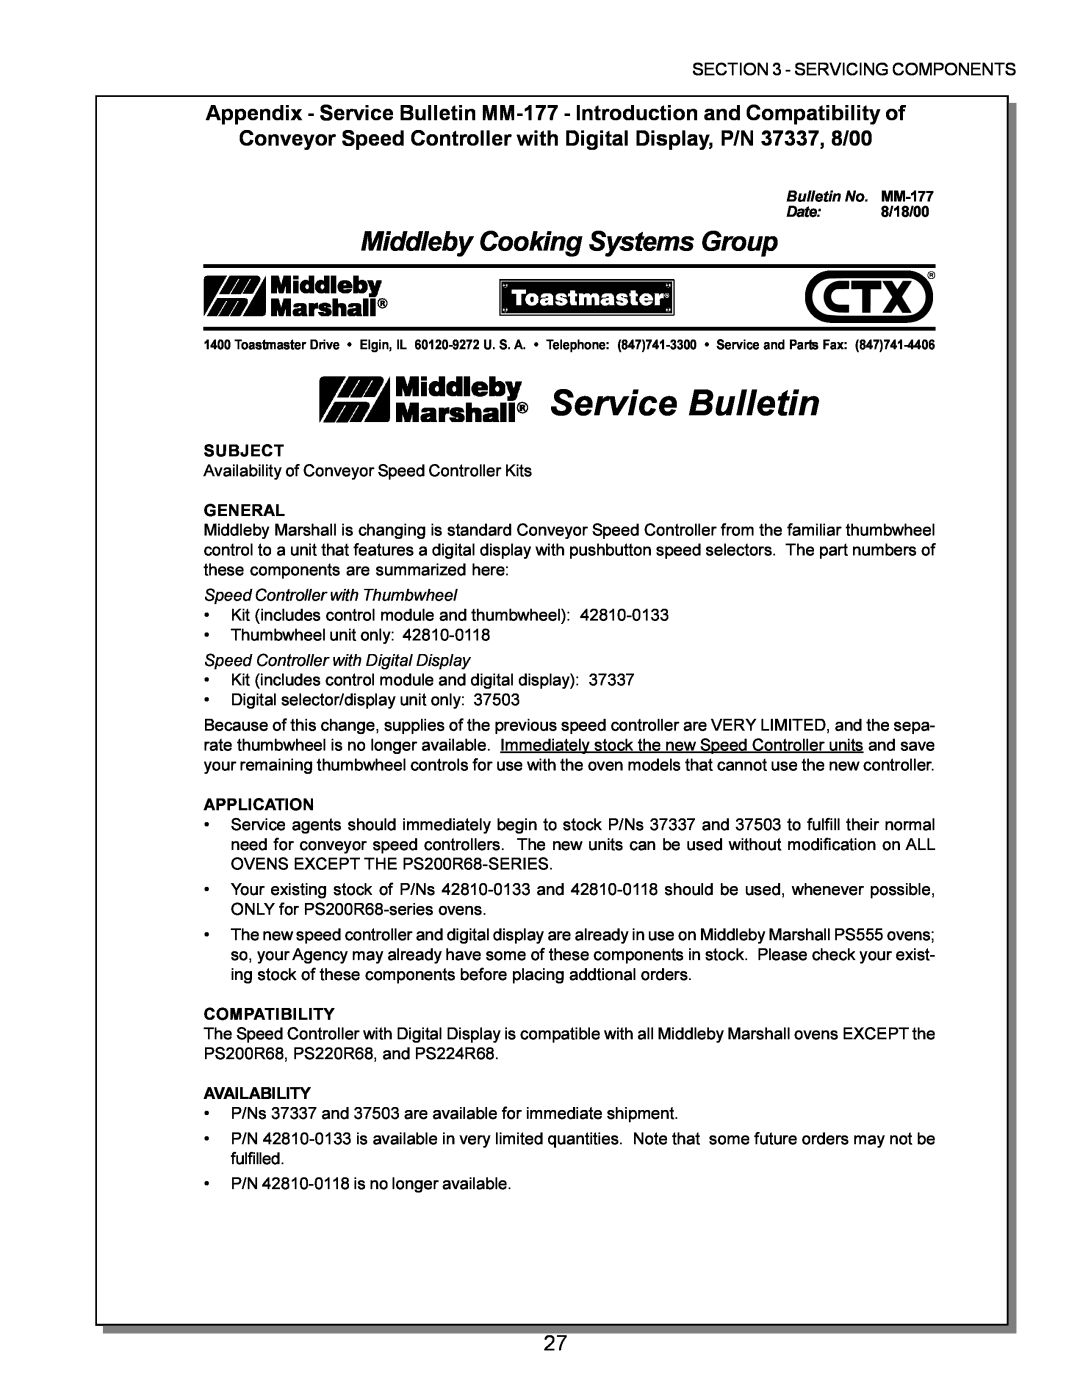 Middleby Marshall PS220 Service Bulletin, Middleby Cooking Systems Group, Subject, General, Application, Compatibility 